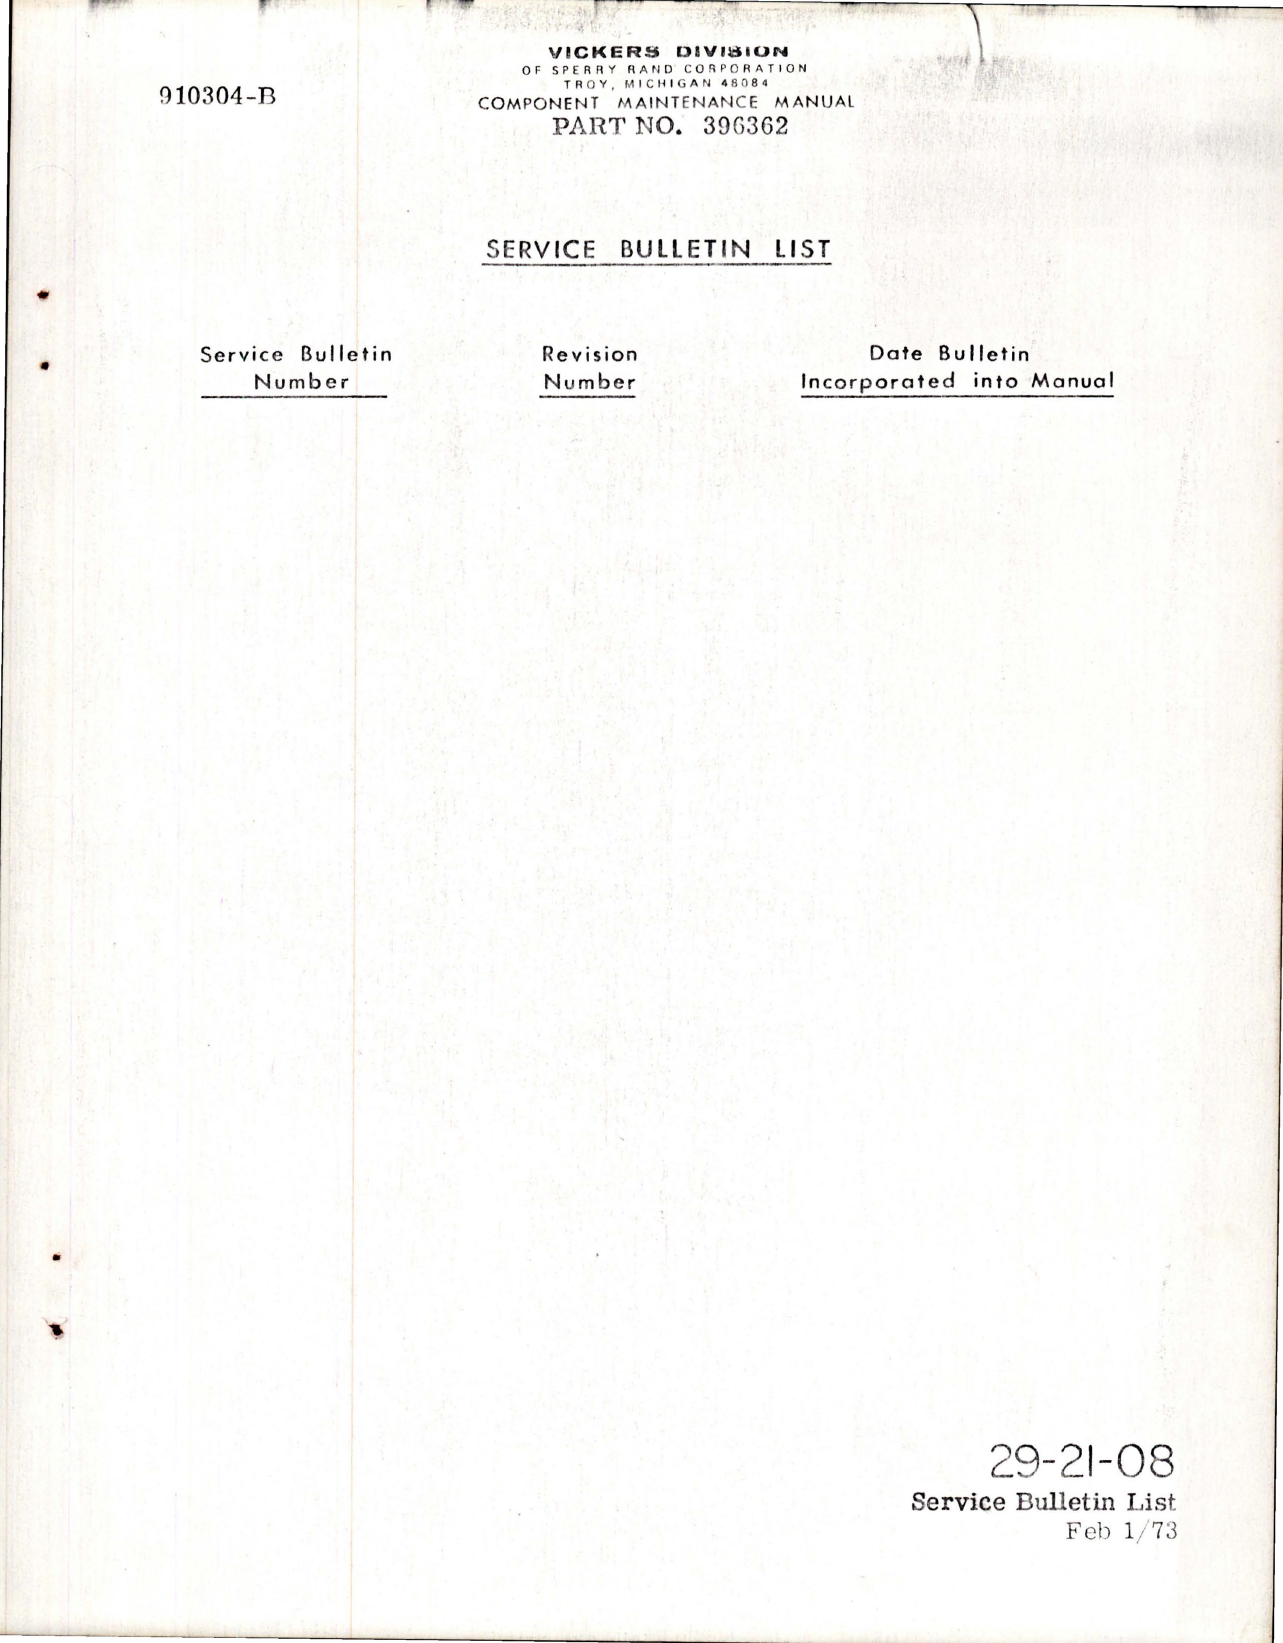 Sample page 5 from AirCorps Library document: Component Maintenance Manual for Electric Motor - Part 396362 